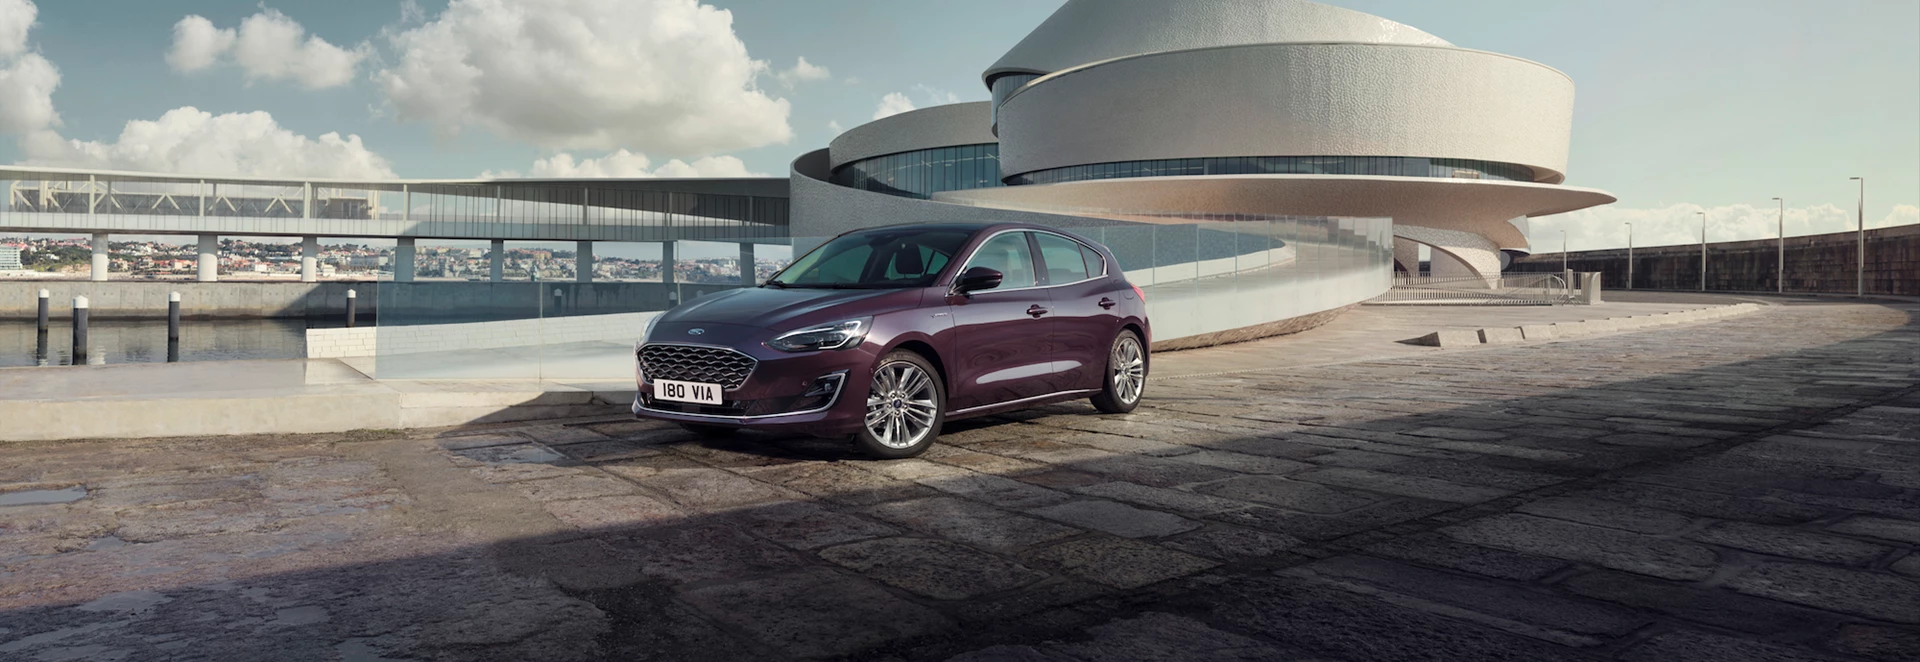 5 reasons why you should test drive the new Ford Focus